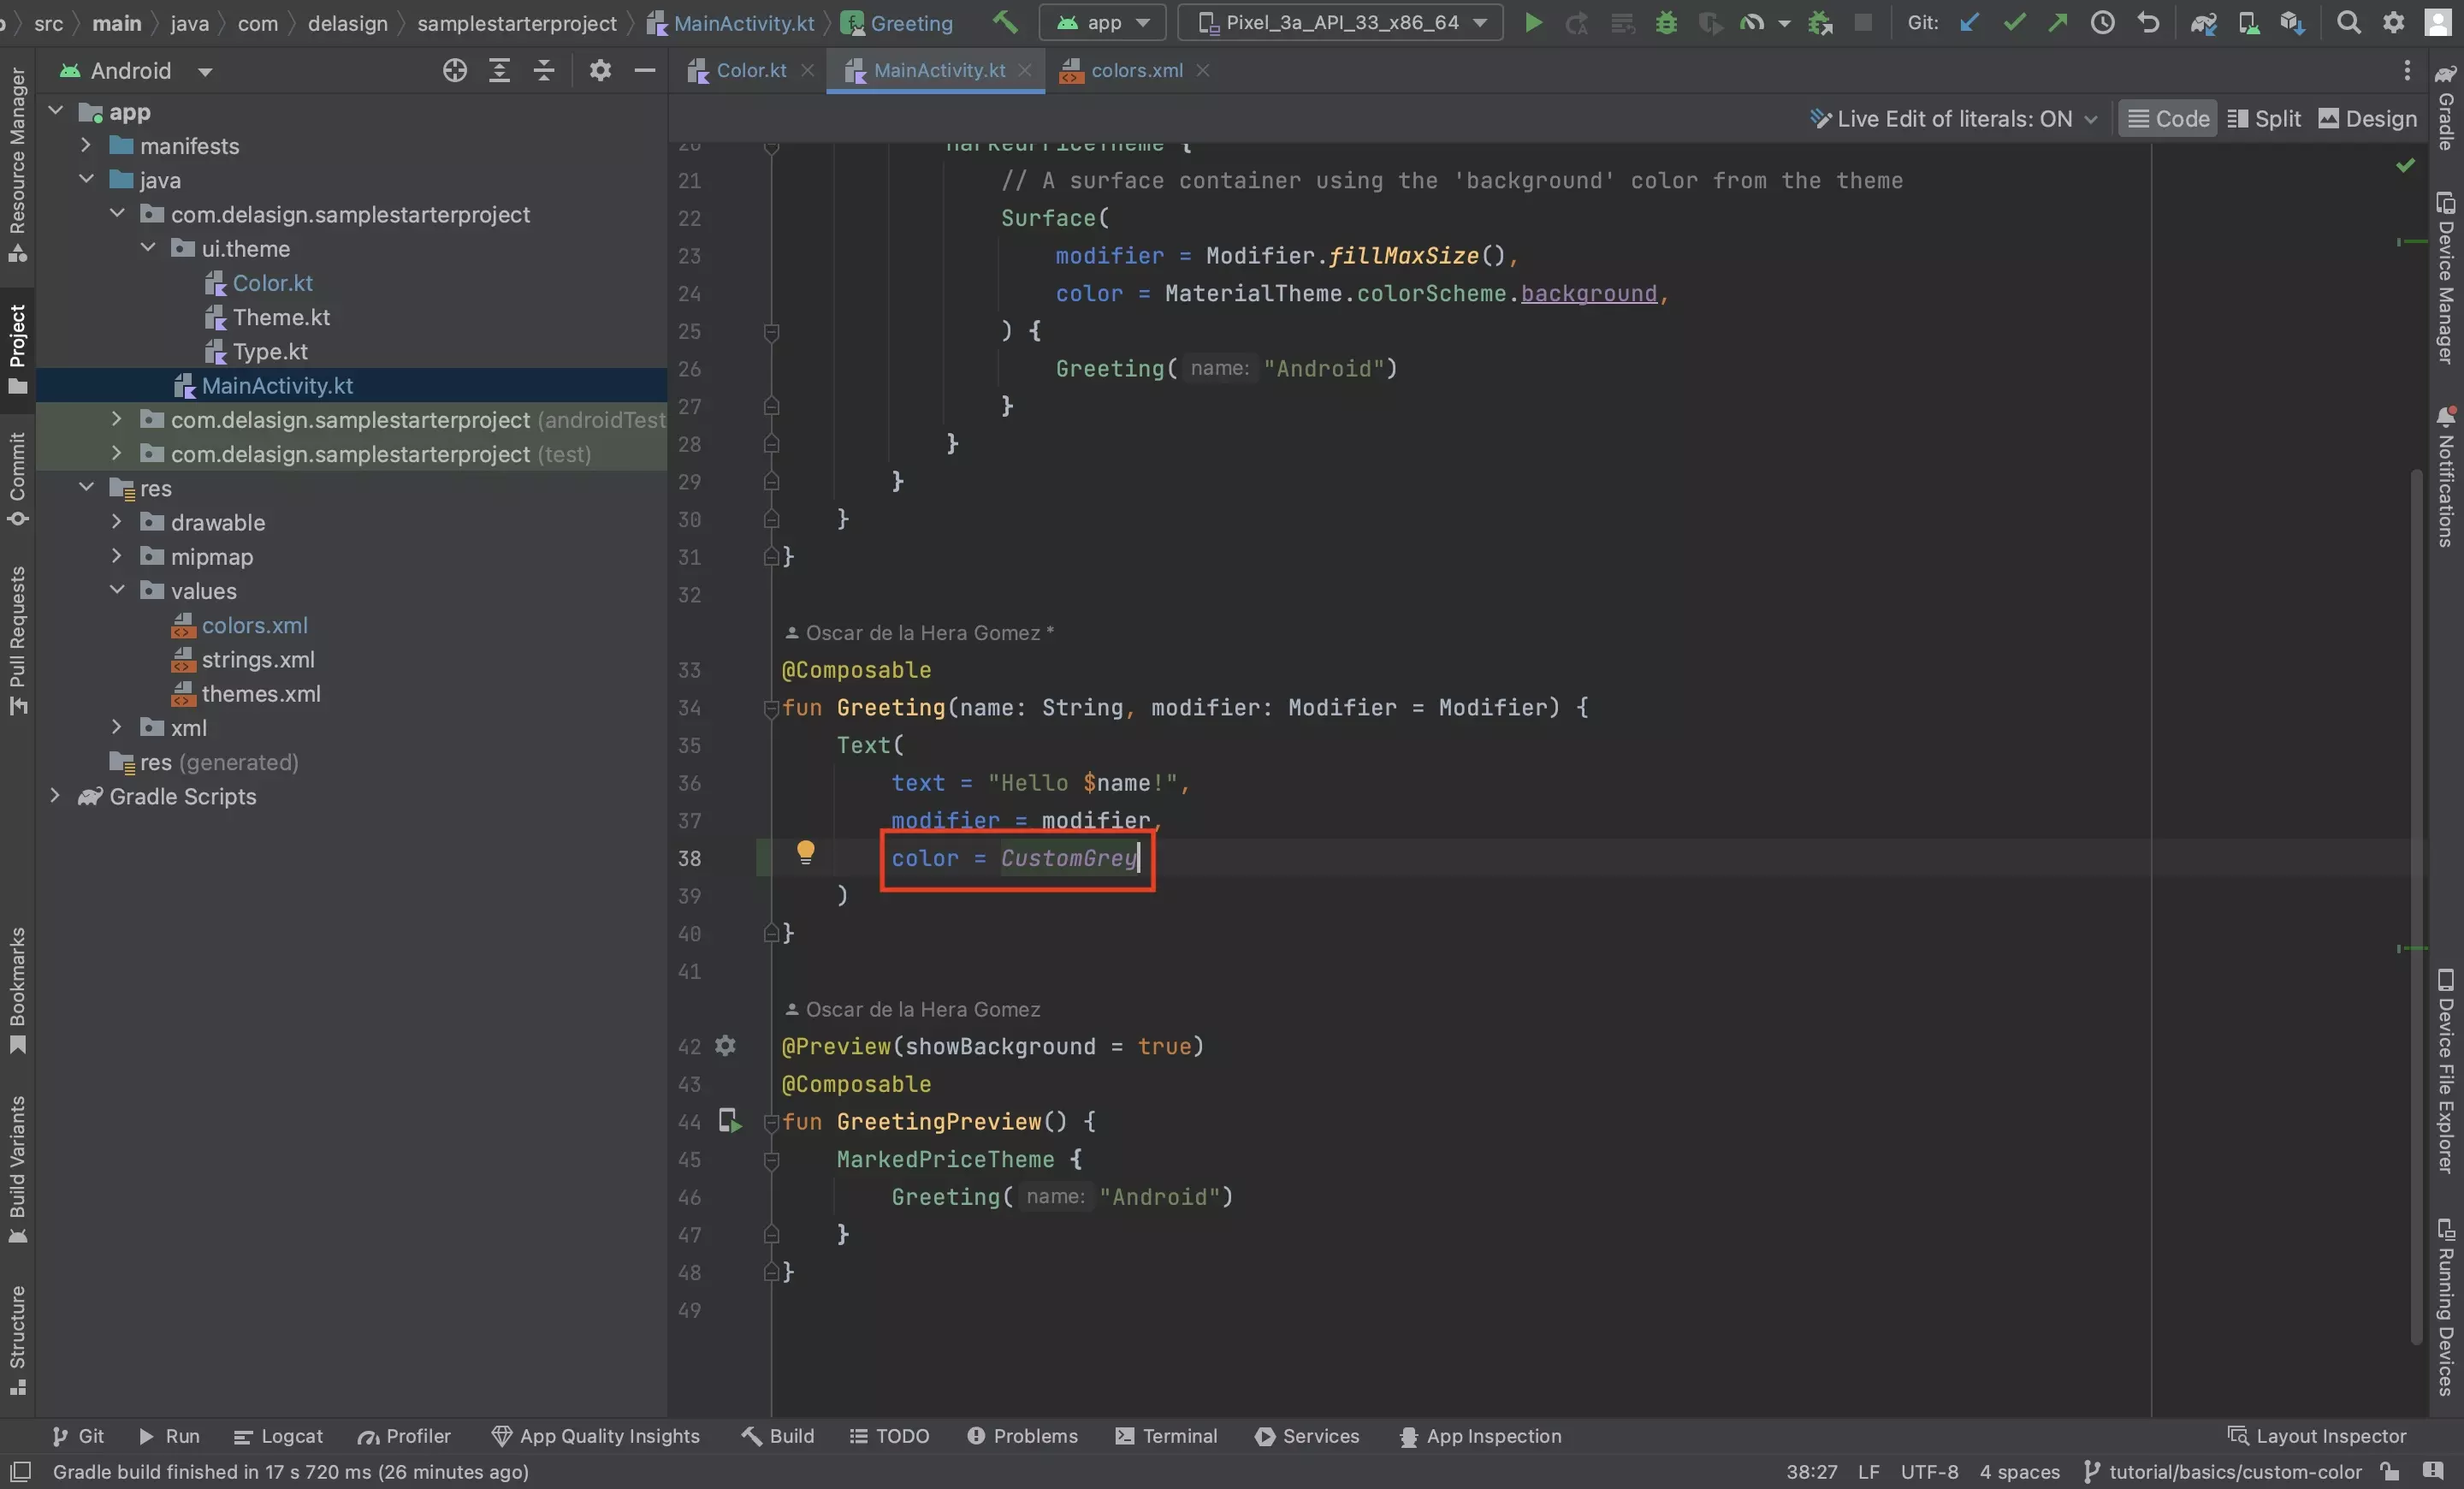 A screenshot of Android Studio showing the Main Activity file, with a color added to the Greetings Composable.